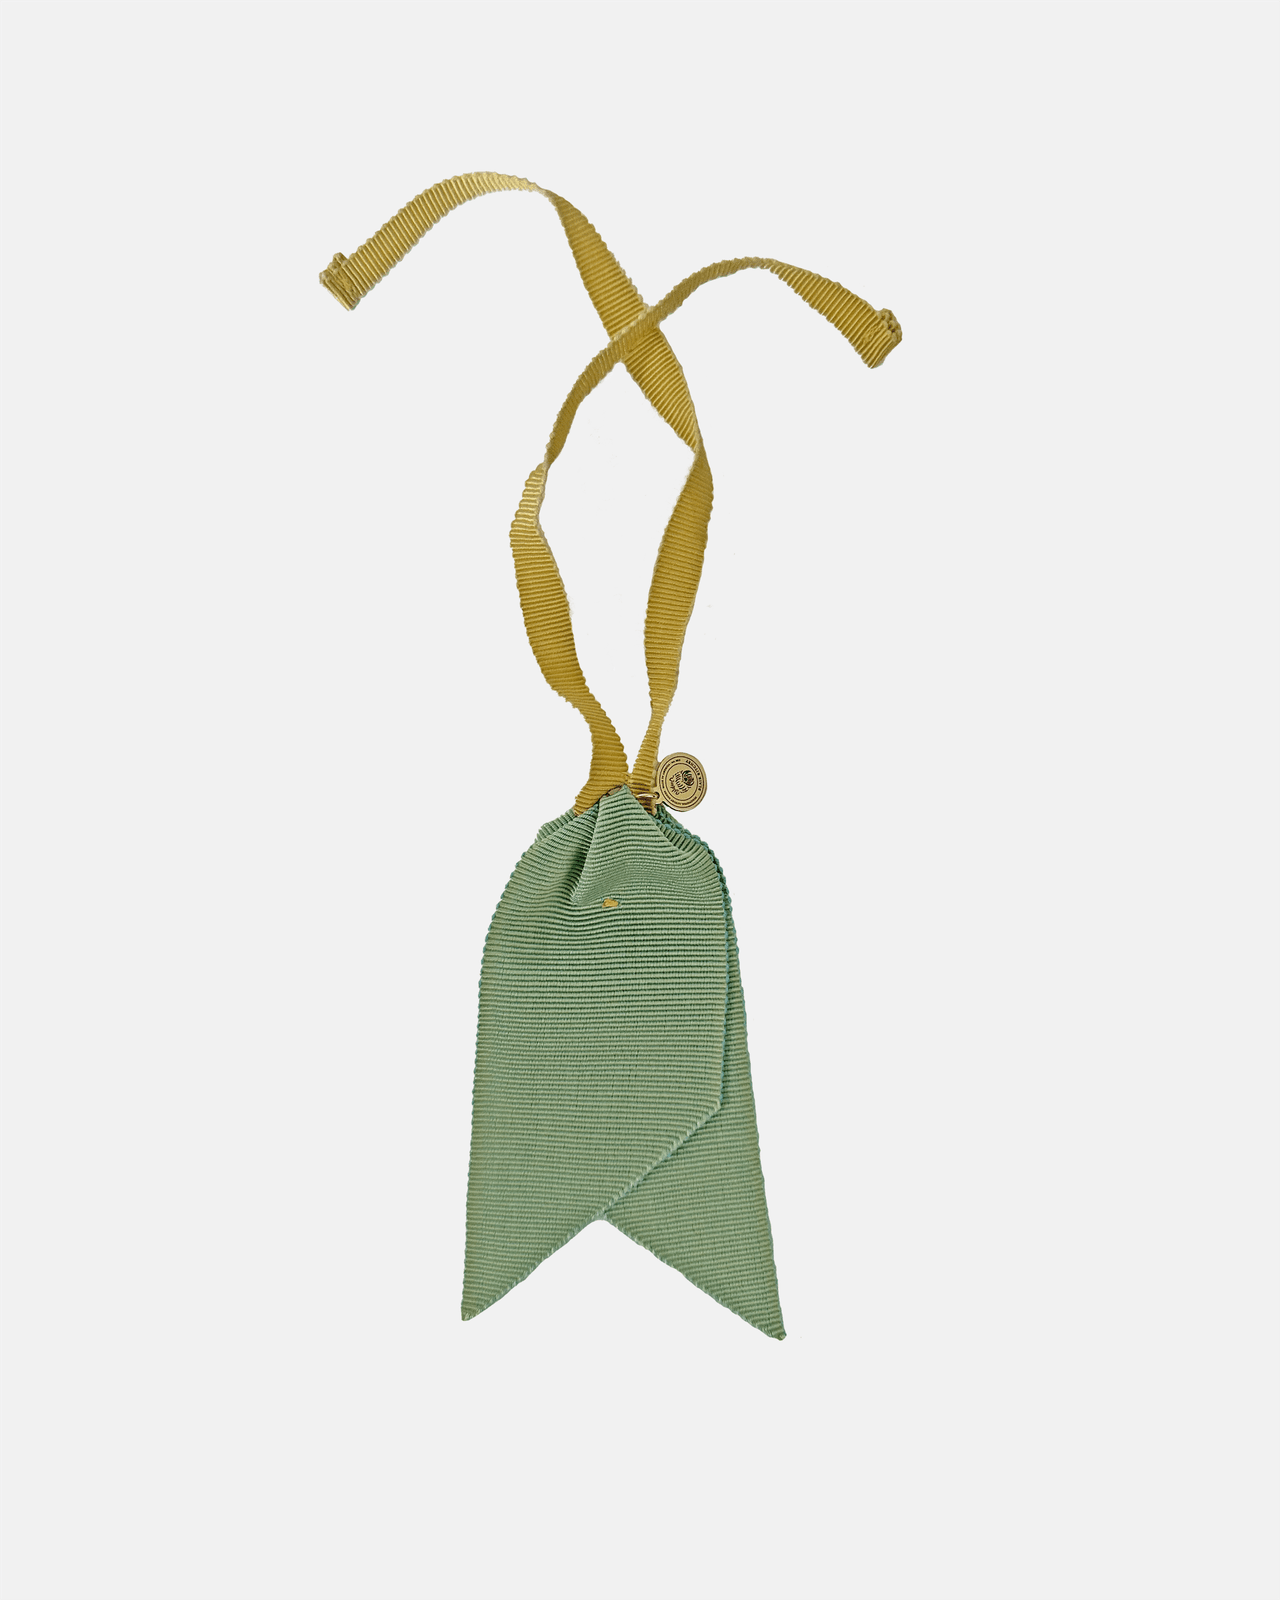 French Ribbon Tie | Mint / Muted Yellow Blair Ritchey